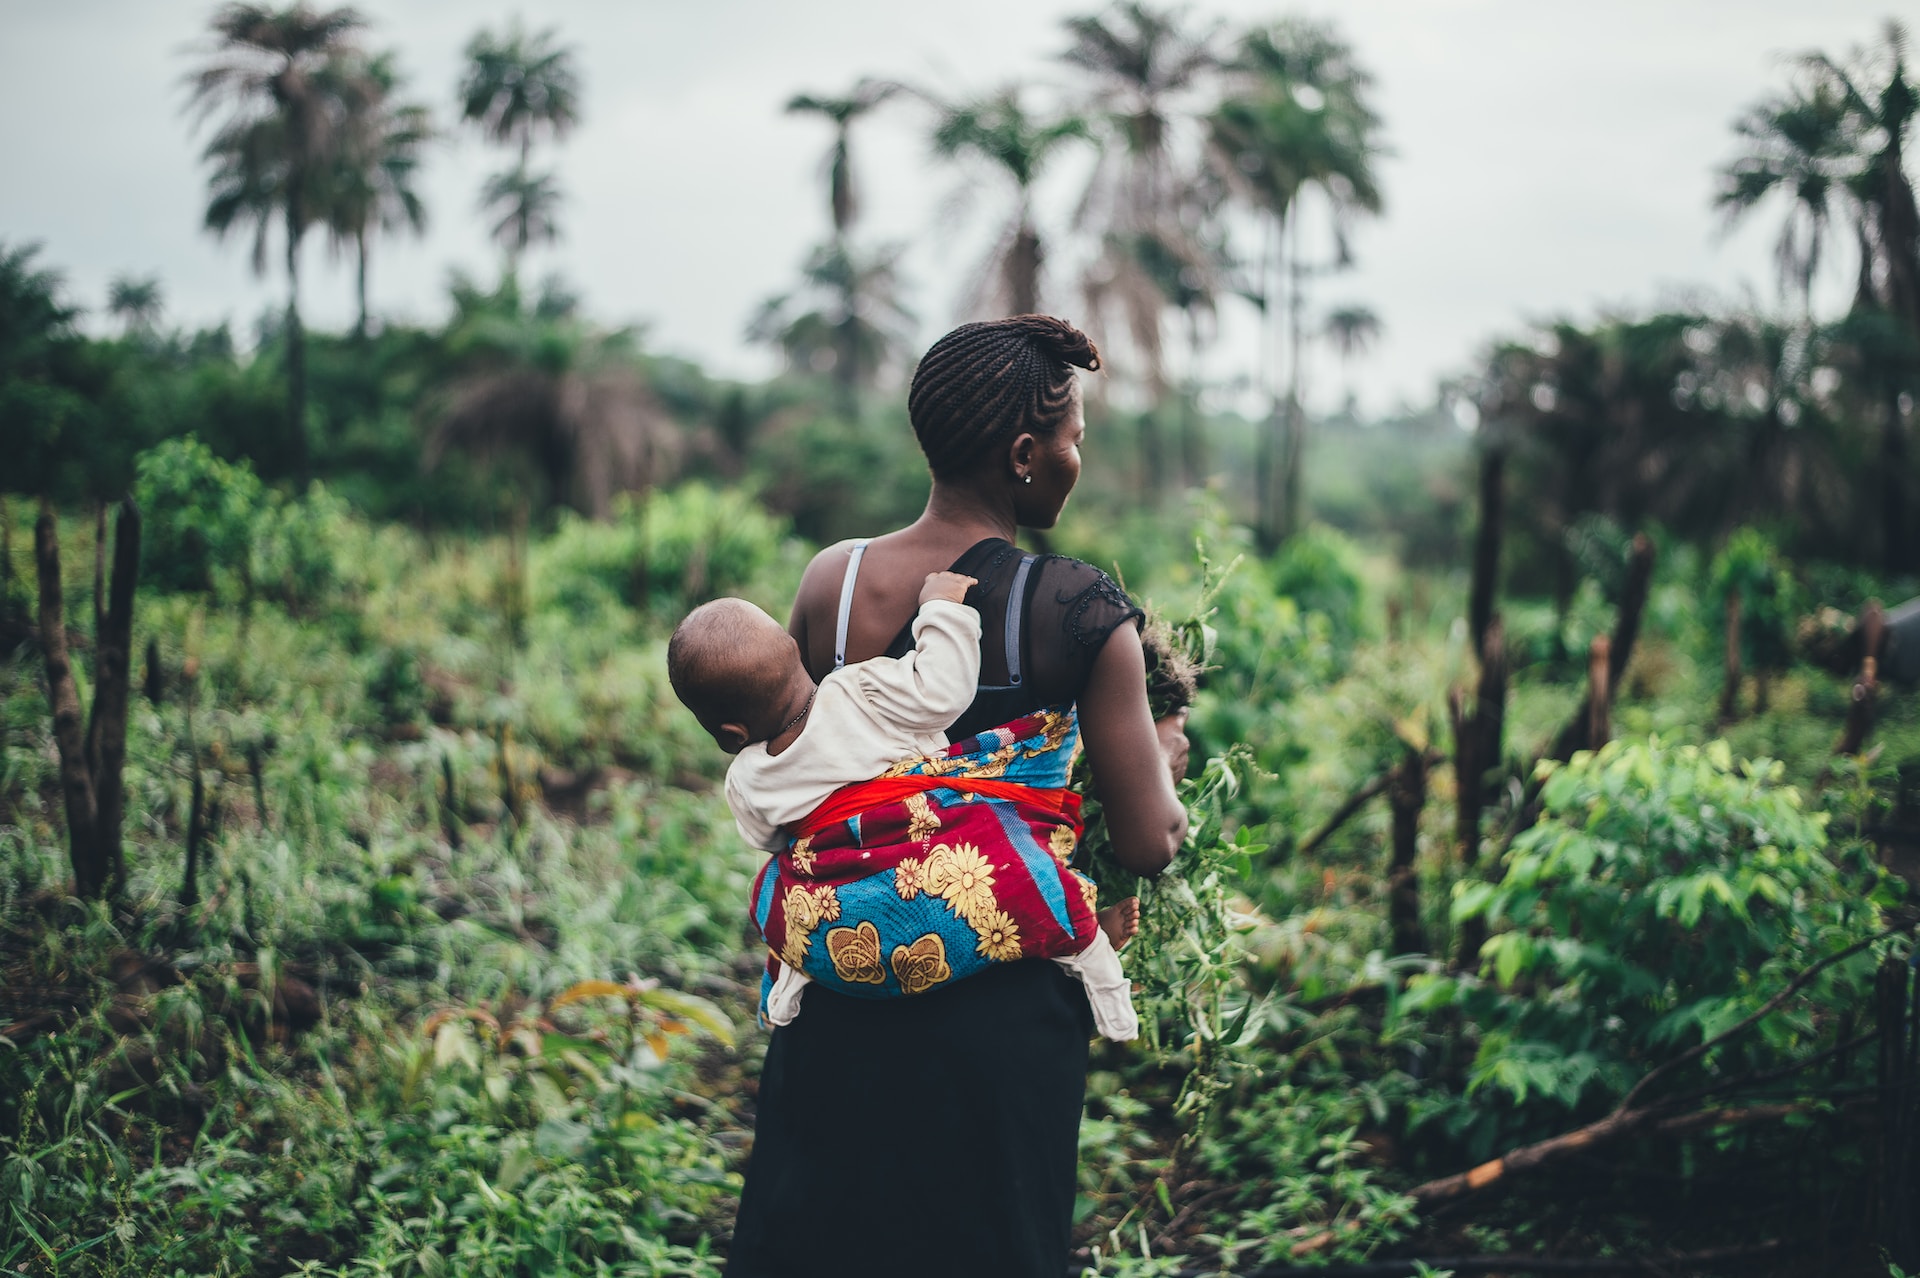 An image of an African woman and her child in a village without internet connectivity for fintech